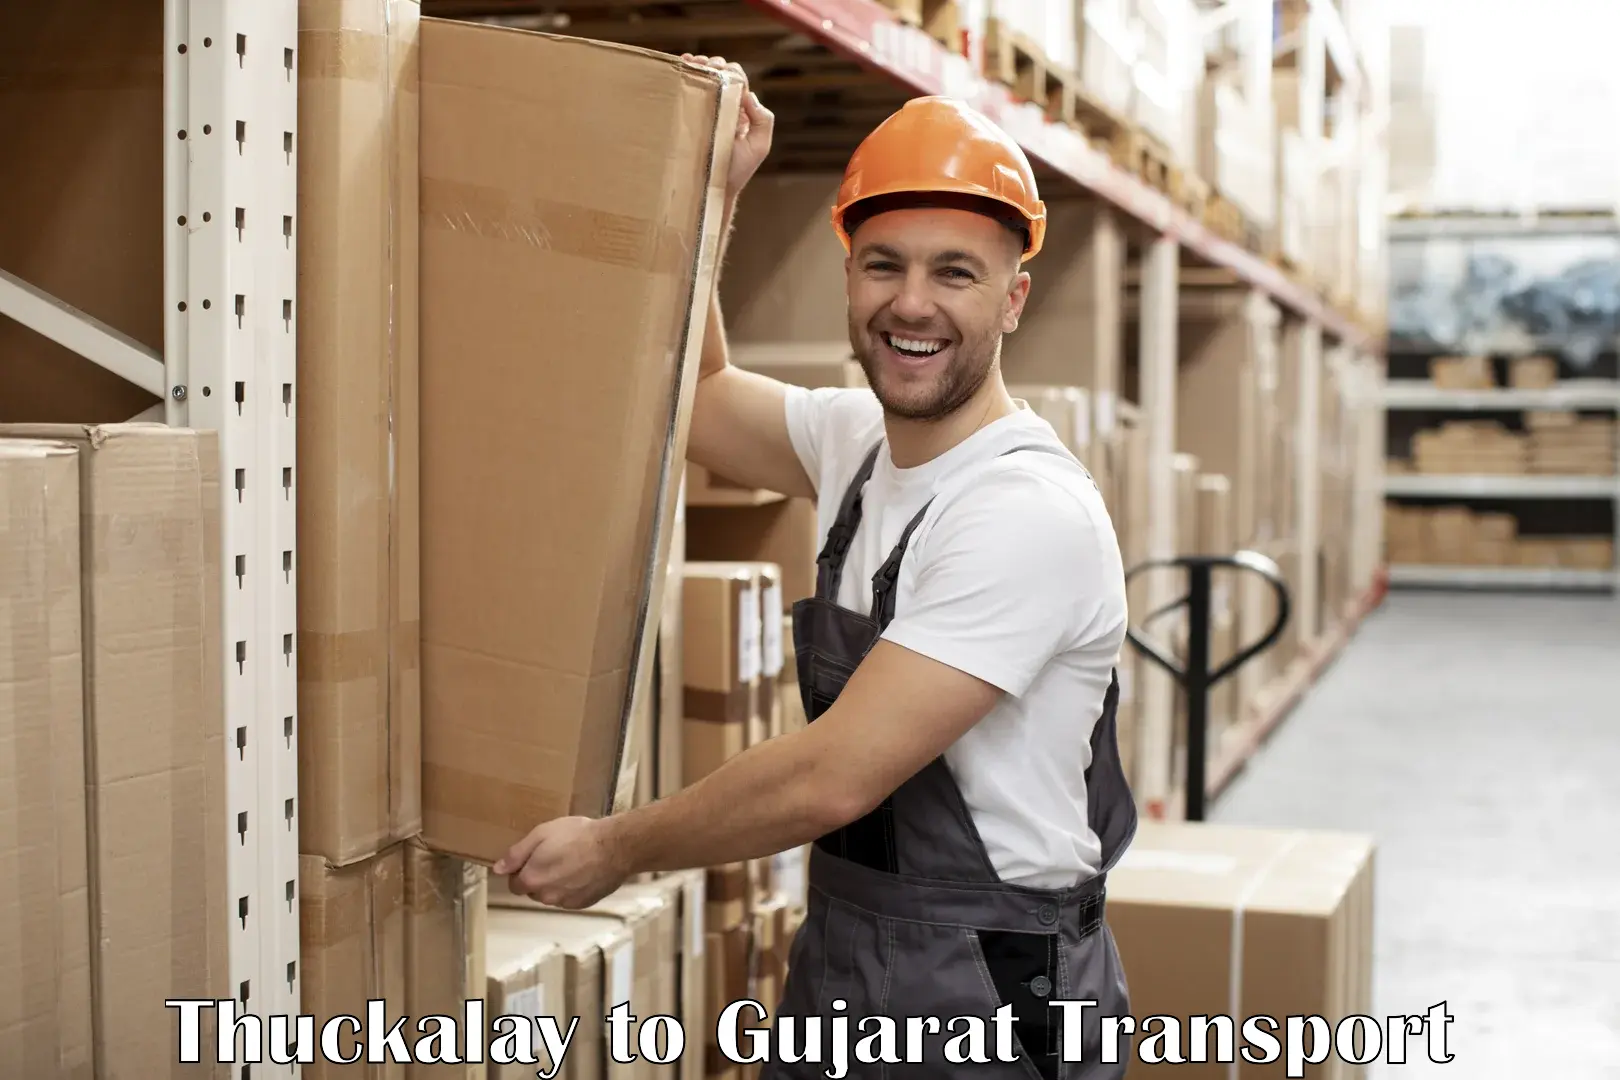 Scooty transport charges Thuckalay to Gujarat